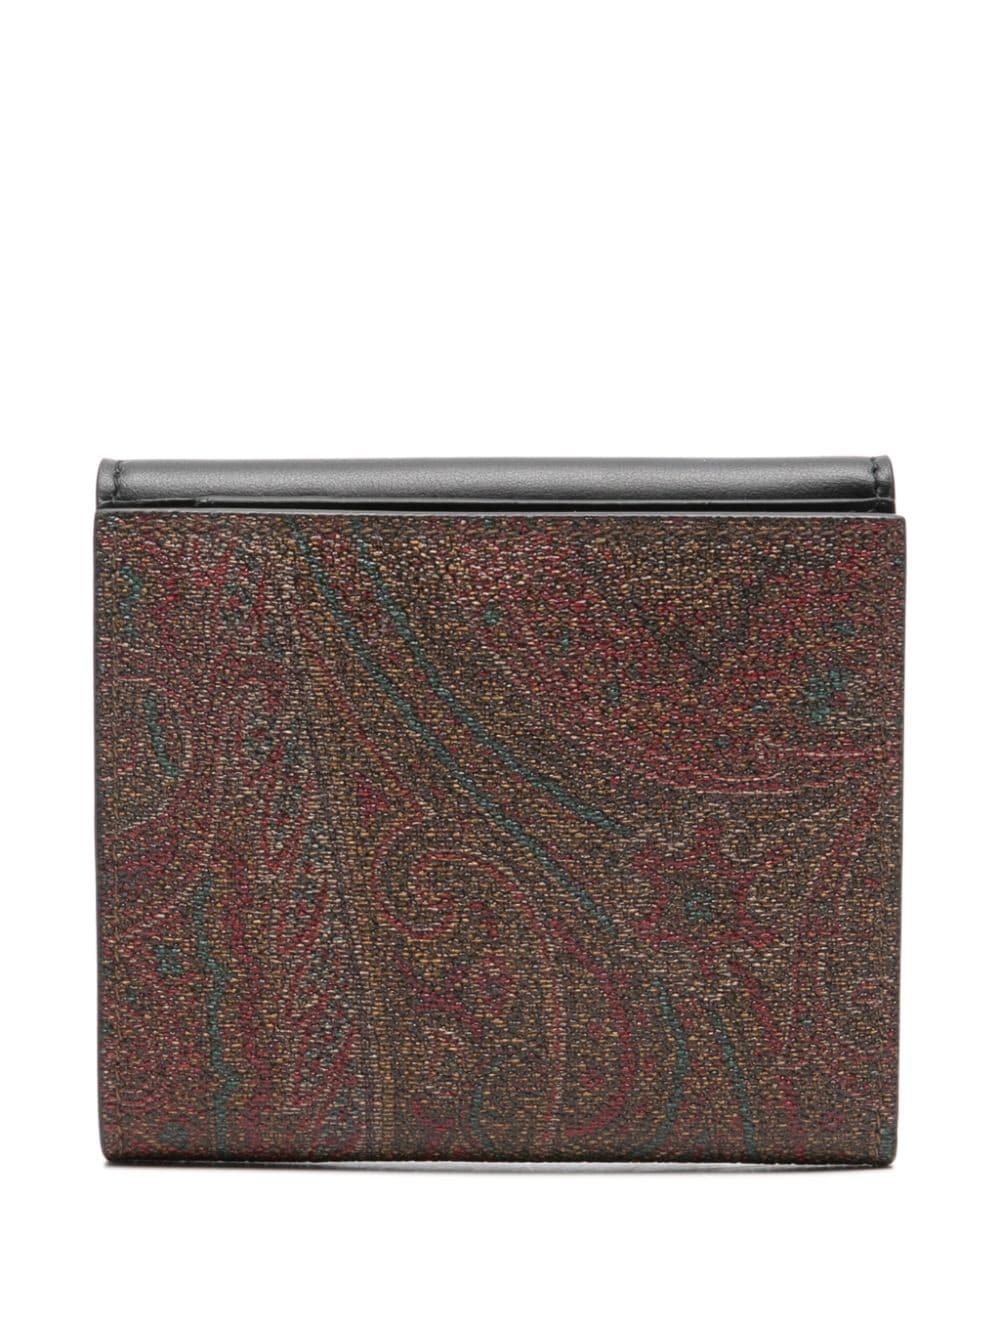 paisley textured leather wallet - 2